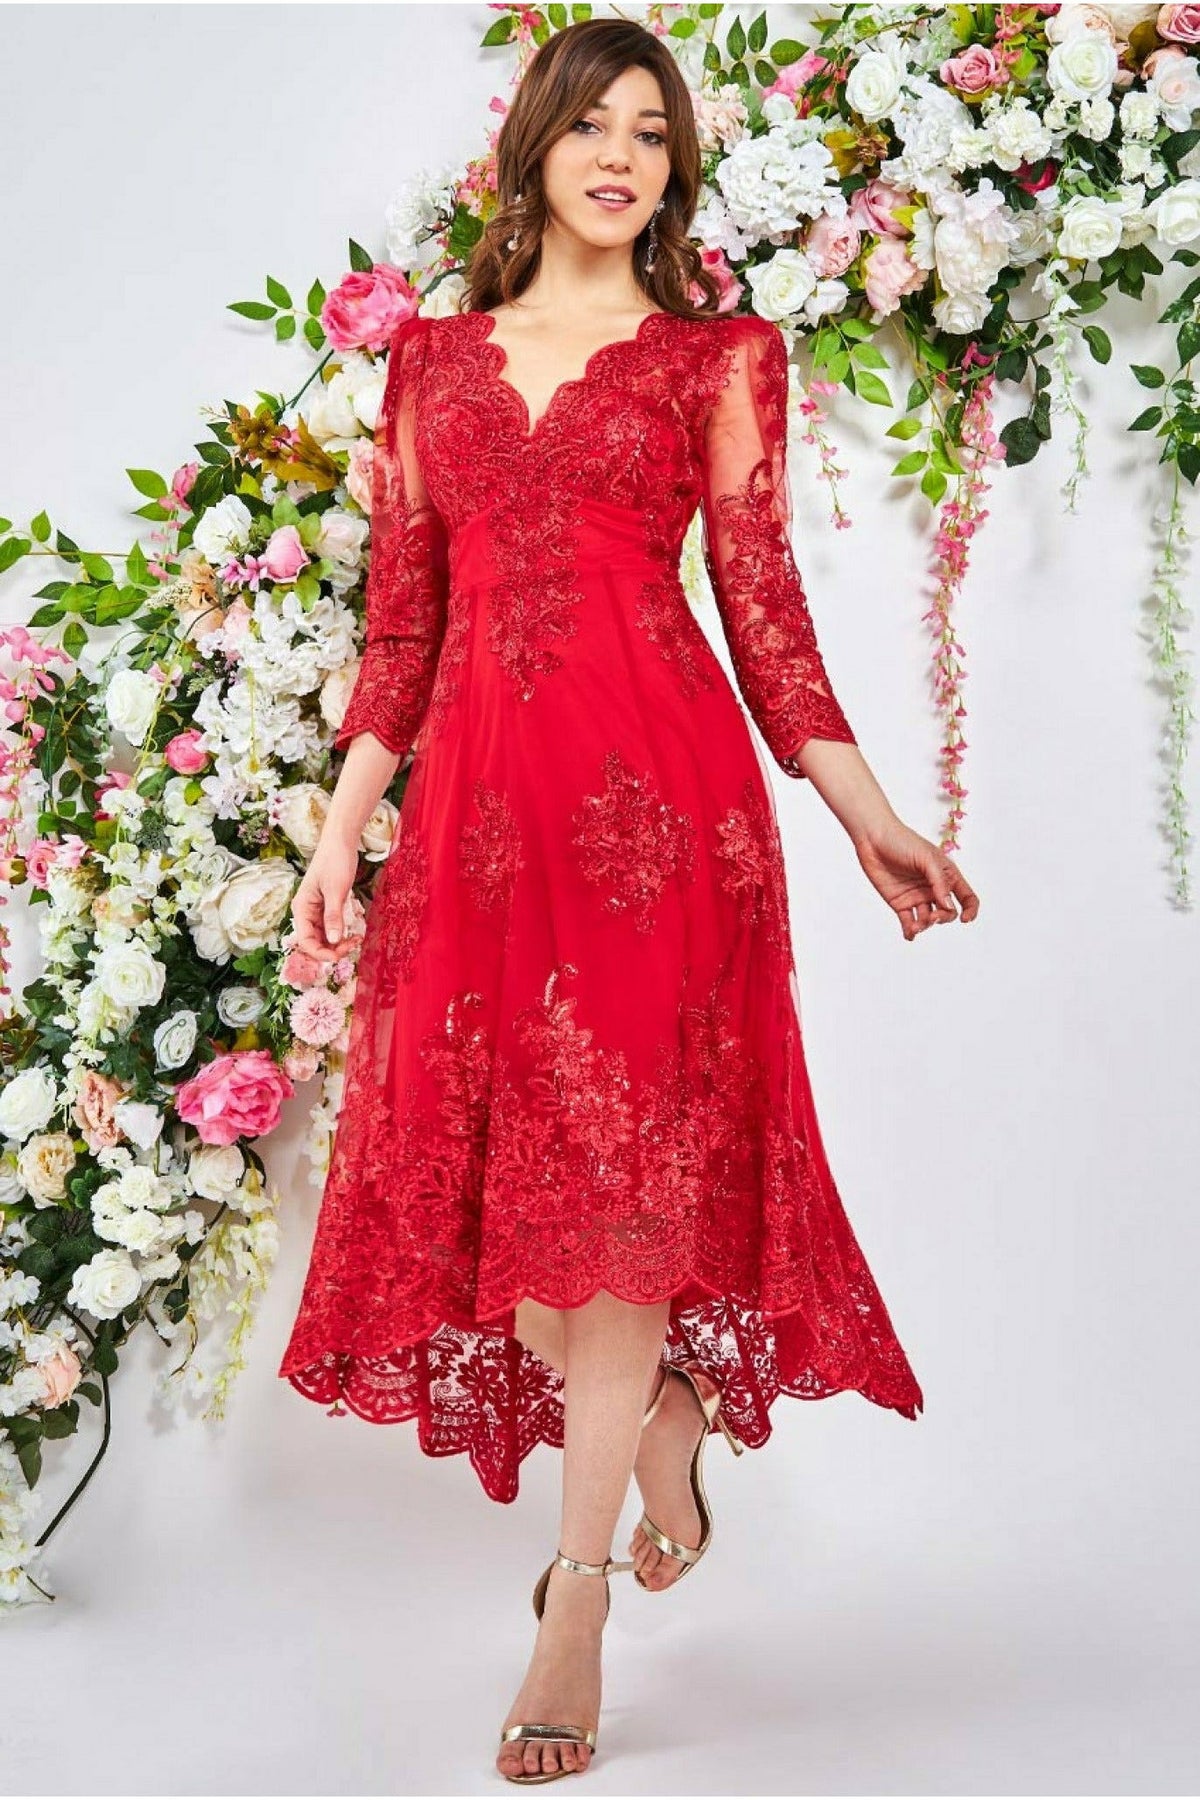 Hot Sale Red Lace Chiffon Evening Party Dresses Short Sleeve Prom Dresses  on Sale - June Bridals